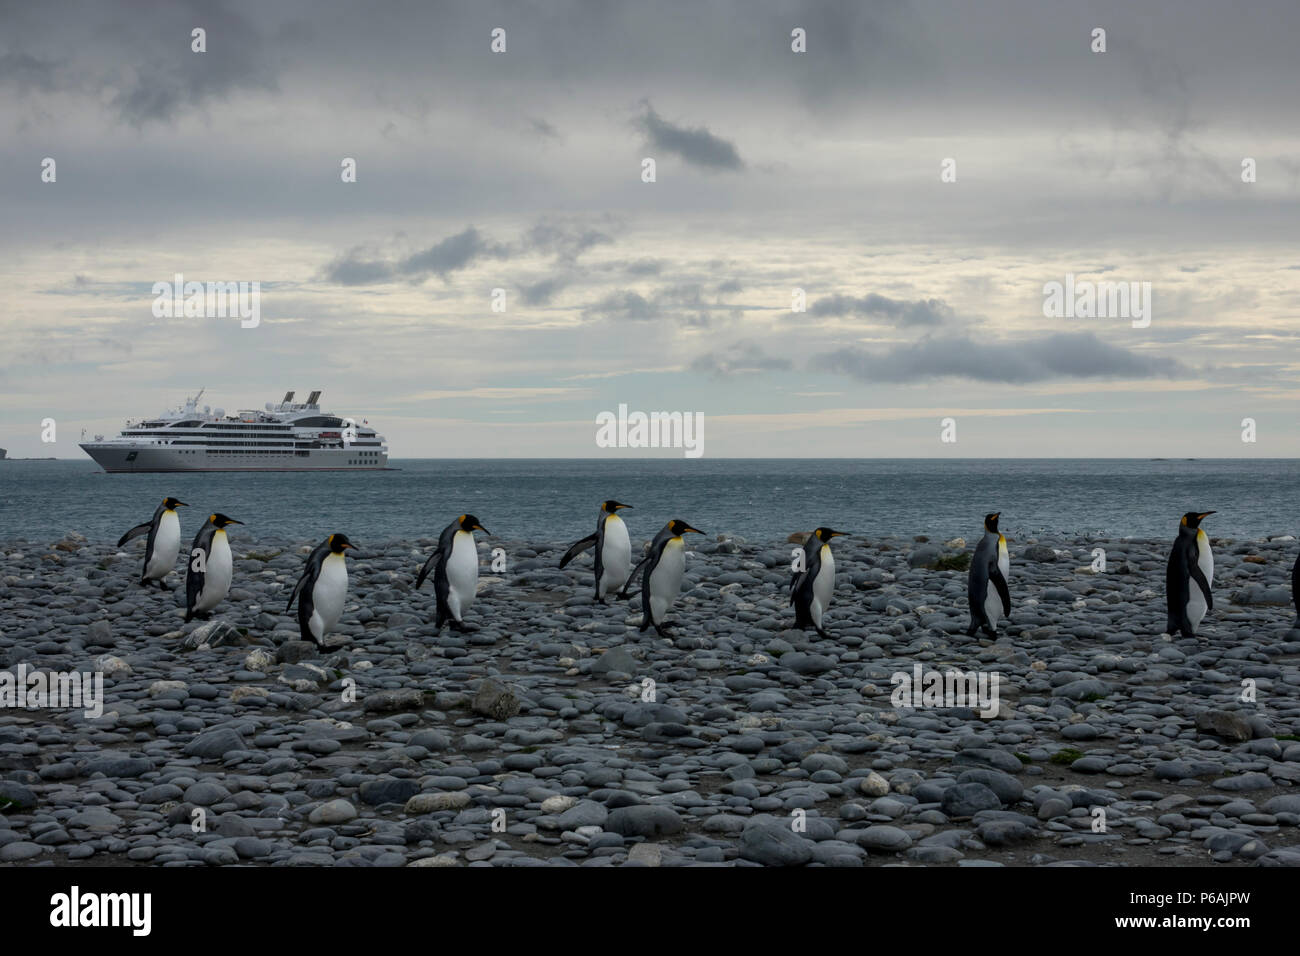 King penguins returning to the massive colony located at Salisbury Plain, South Georgia Island, with Le Lyrial in the background Stock Photo